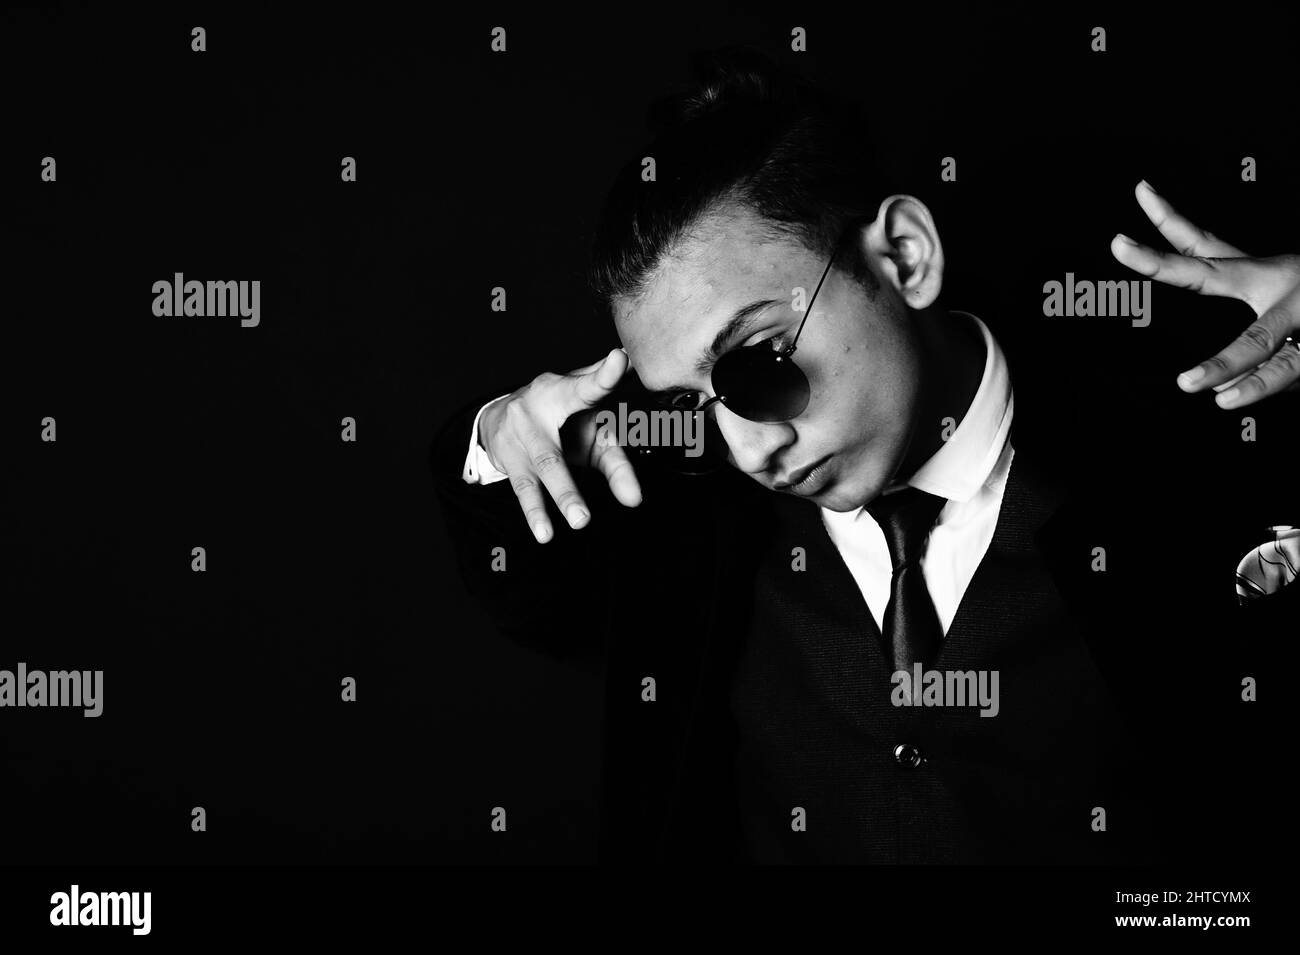 A grayscale portrait of a hip young South Asian man in a suit with random hand gesture against a dark background Stock Photo